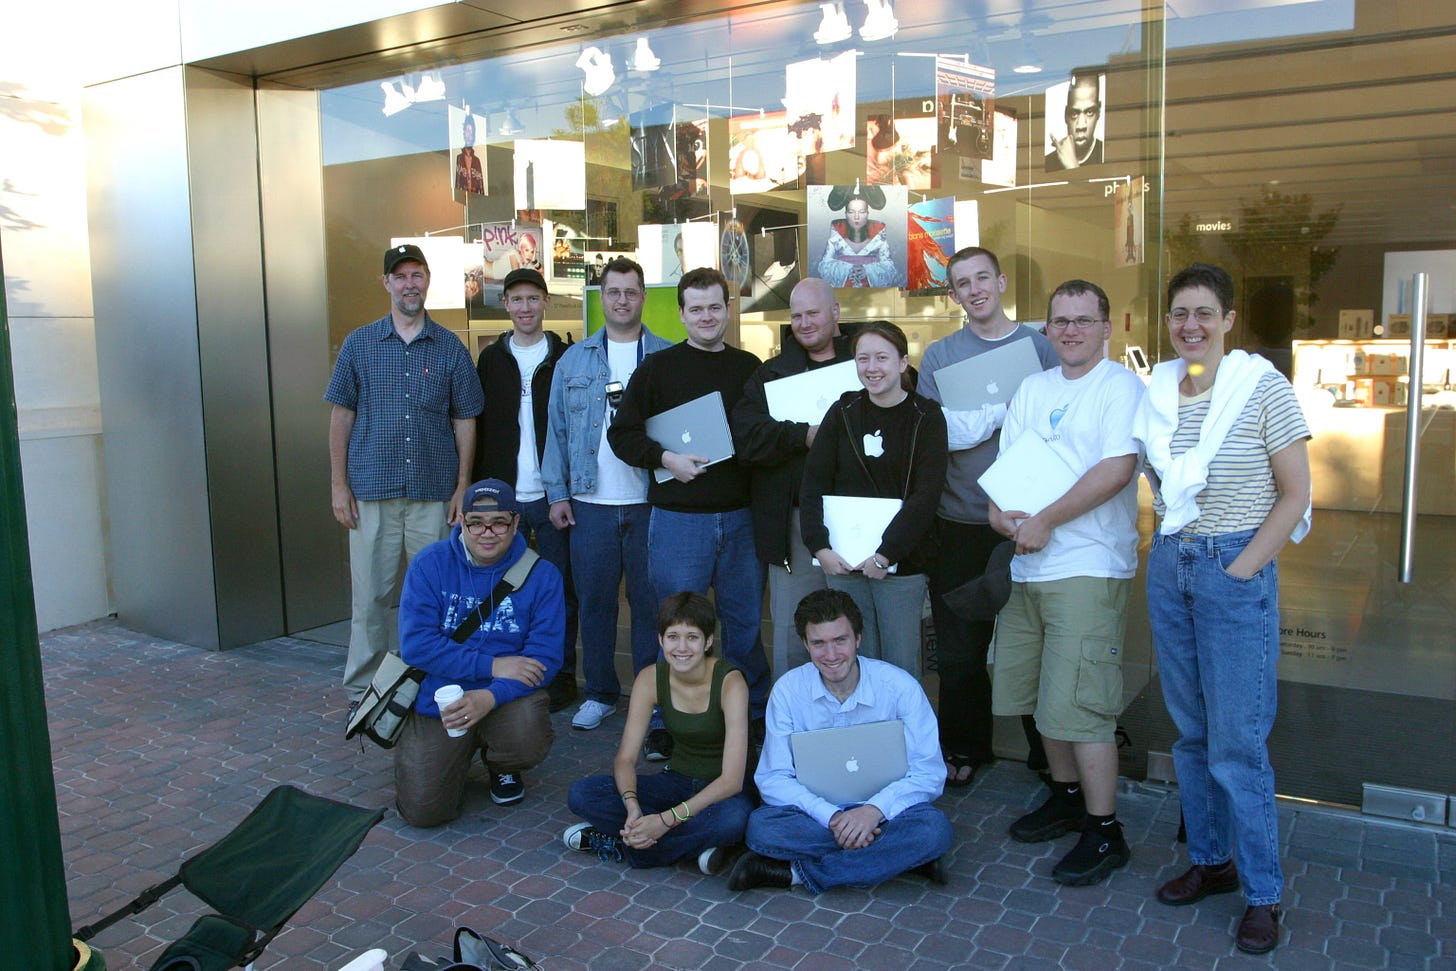 Gary Allen and a group of overnighters stand outside Apple Walnut Creek.